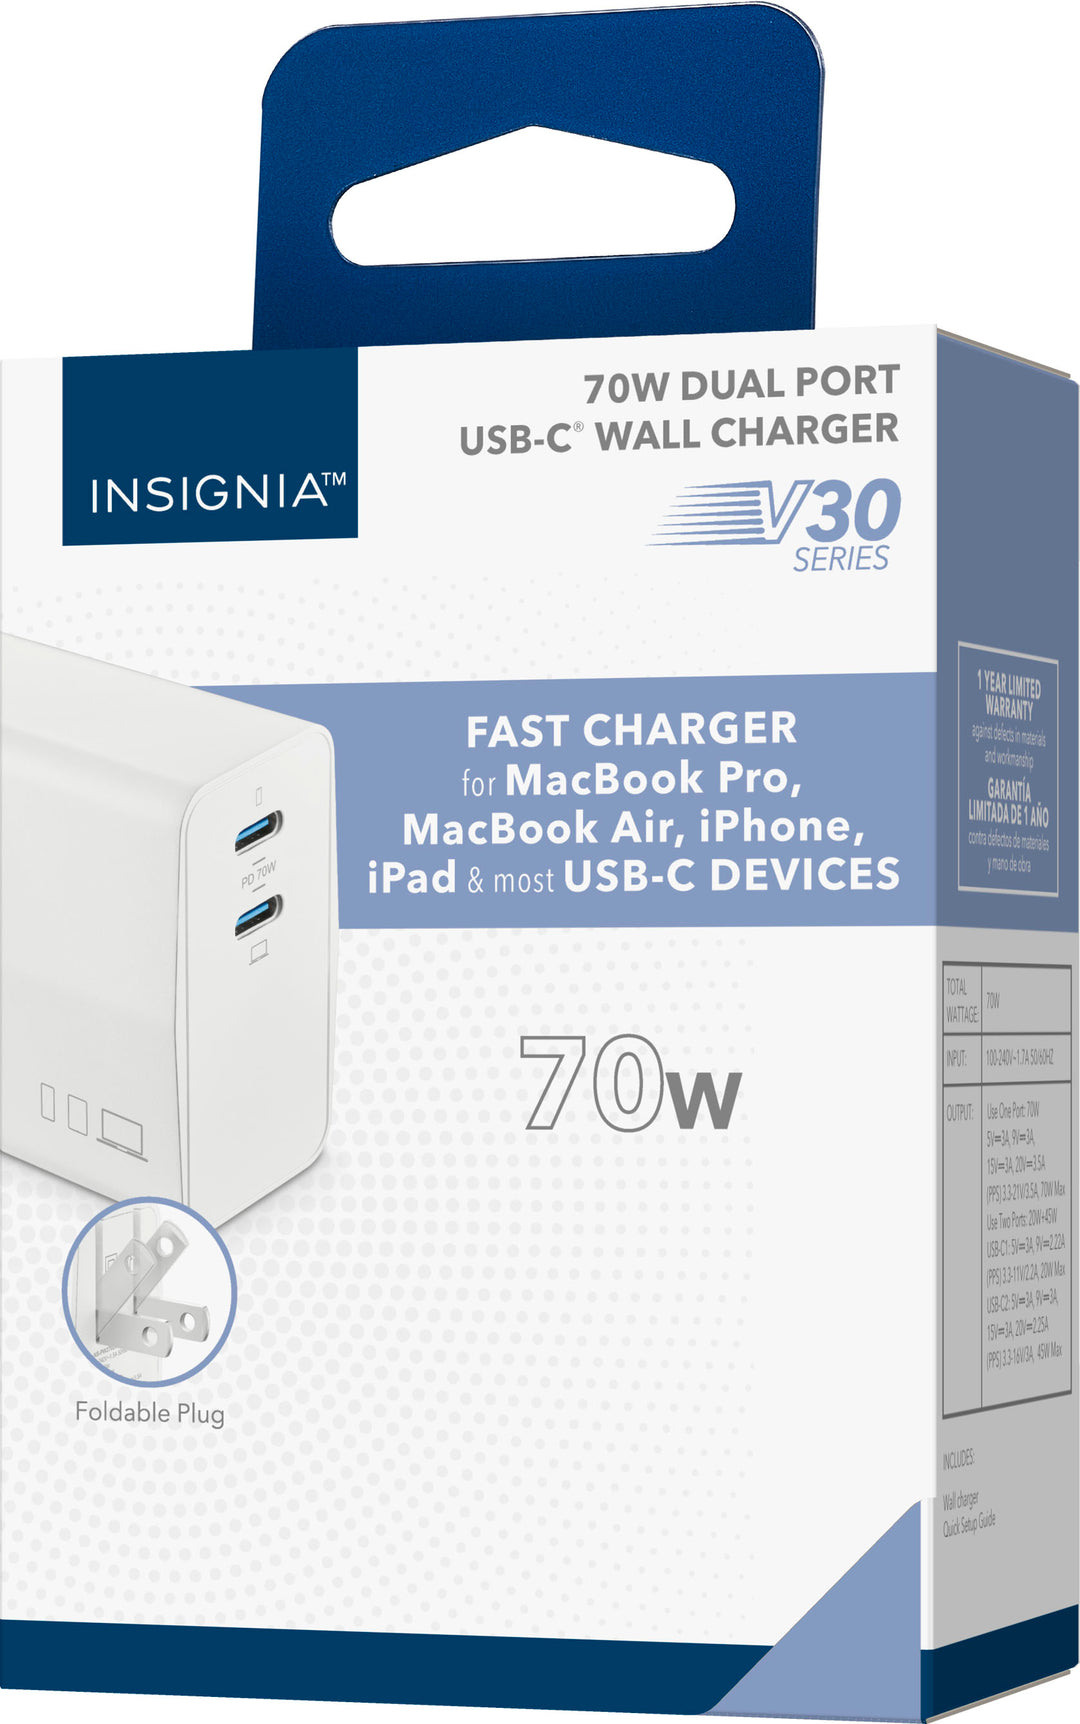 Insignia™ - 70W Dual Port USB-C Foldable Compact Wall Charger Kit for MacBook Pro, Smartphone, Tablet and More - White_0